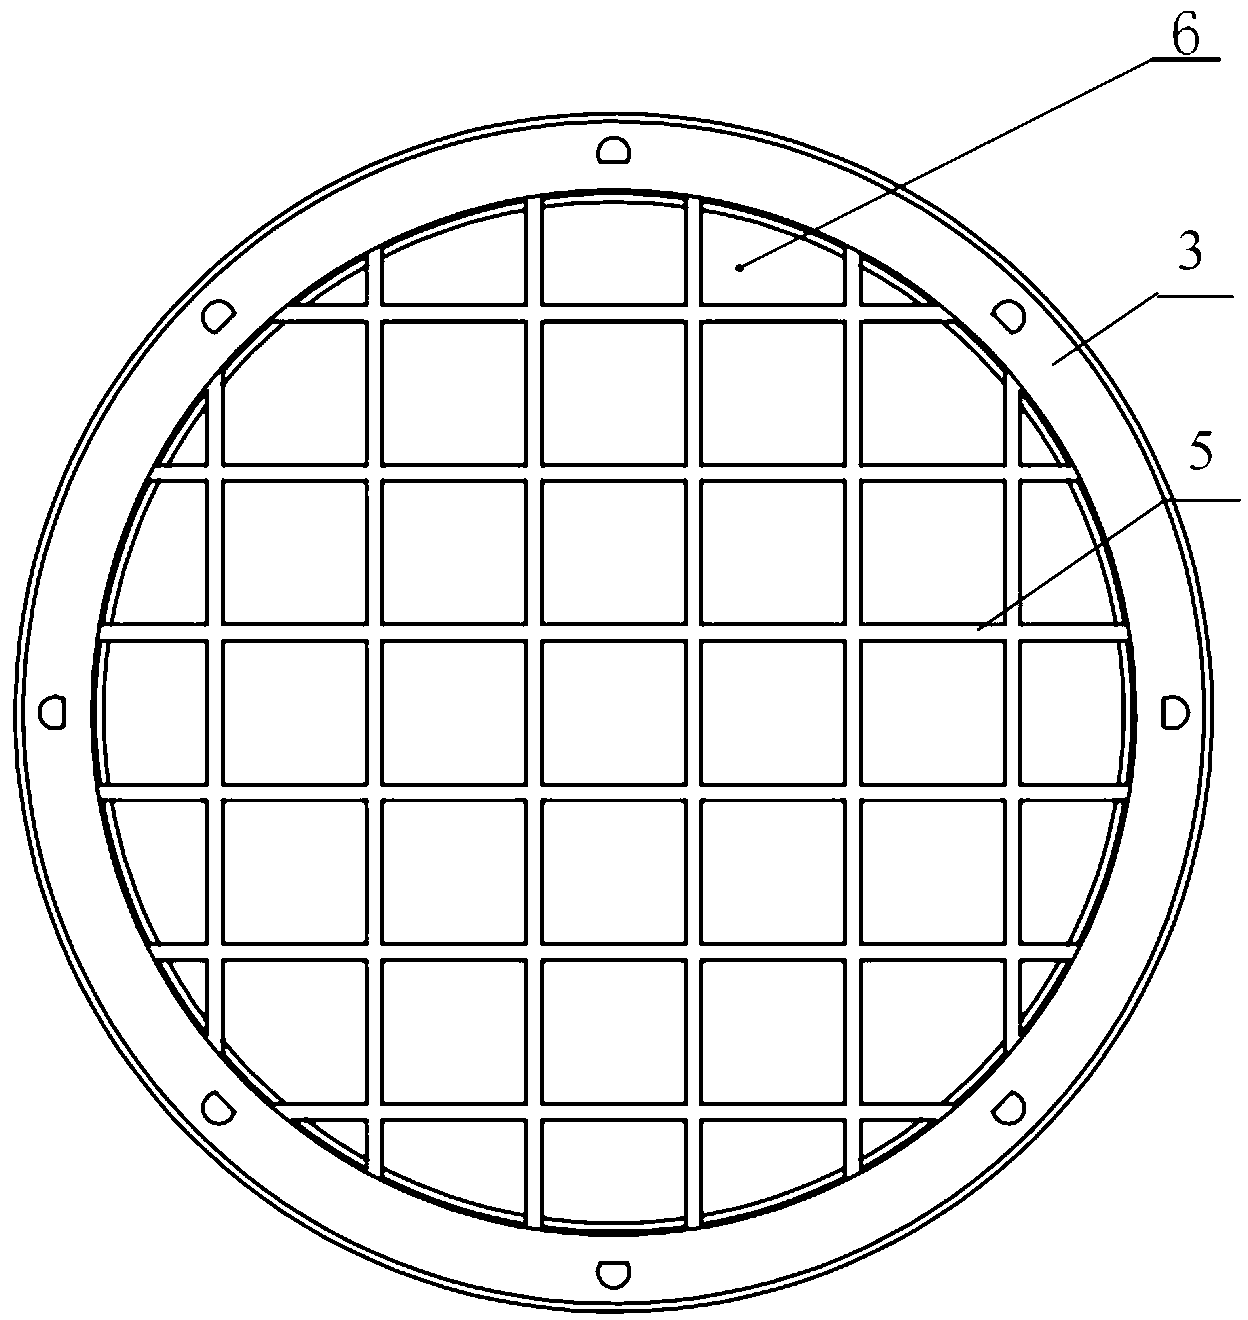 Flexible passive adaptation type fairing disc and flexible sandwich layer thereof and method for operating flexible passive adaptation type fairing discs